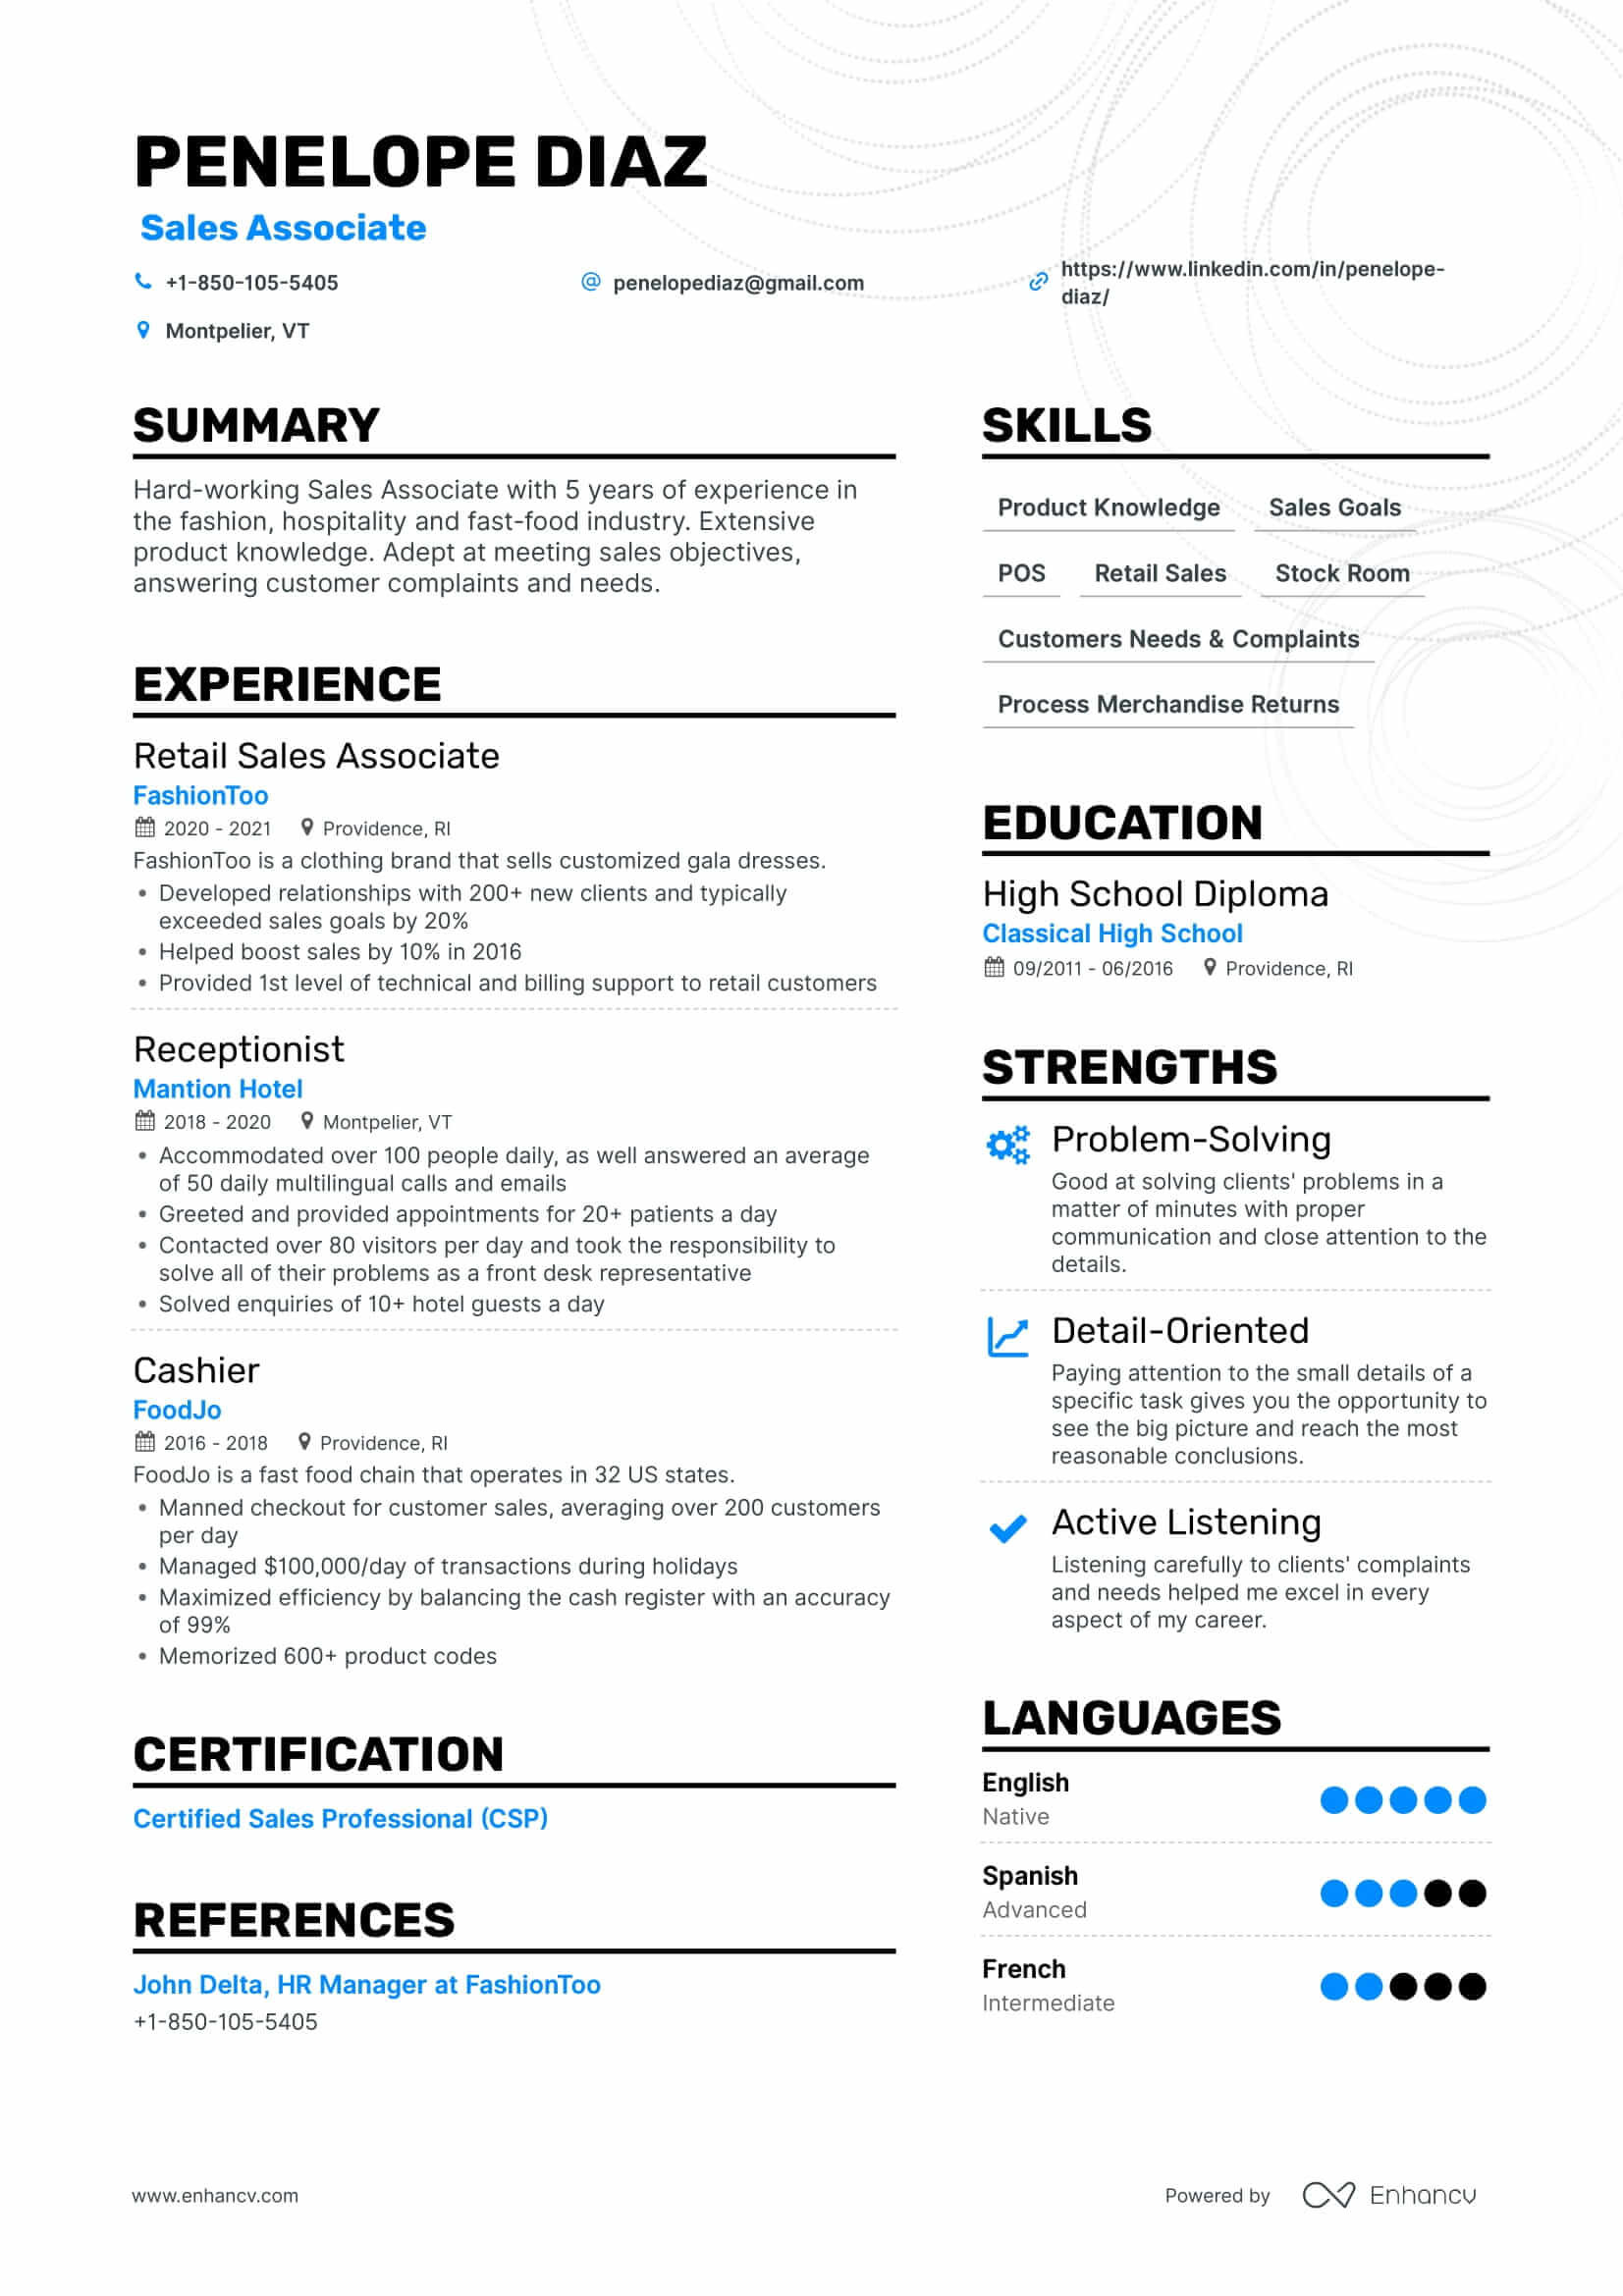 Laboratory Client Service Representative Resume Objective Sample Job Winning Customer Service Resume Examples & Guide for 2022 …